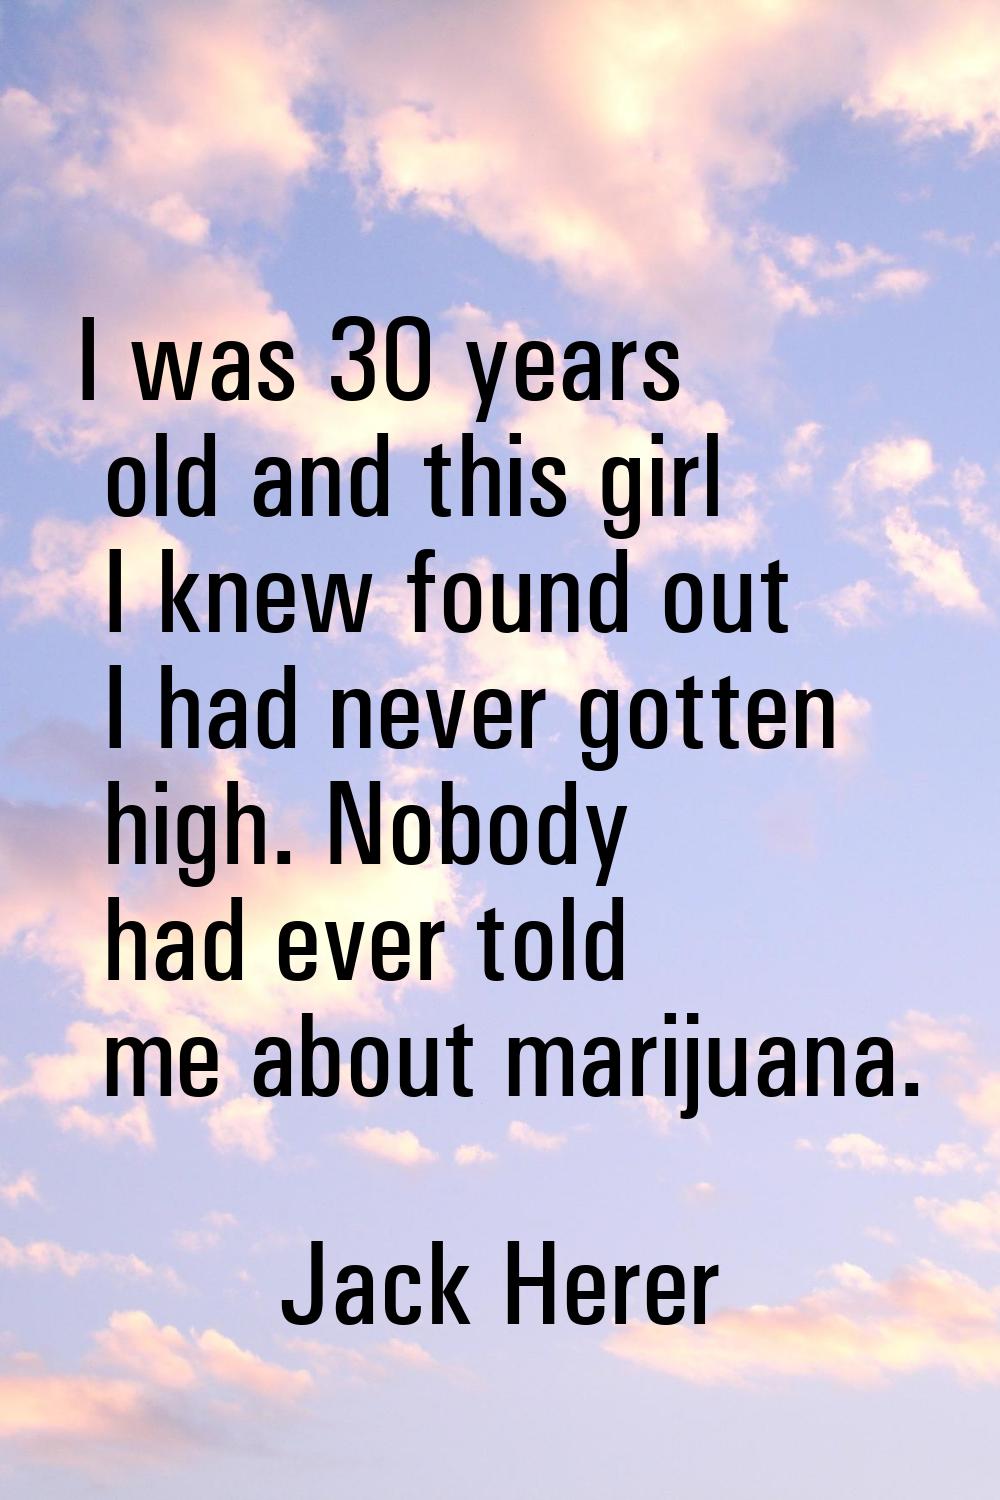 I was 30 years old and this girl I knew found out I had never gotten high. Nobody had ever told me 